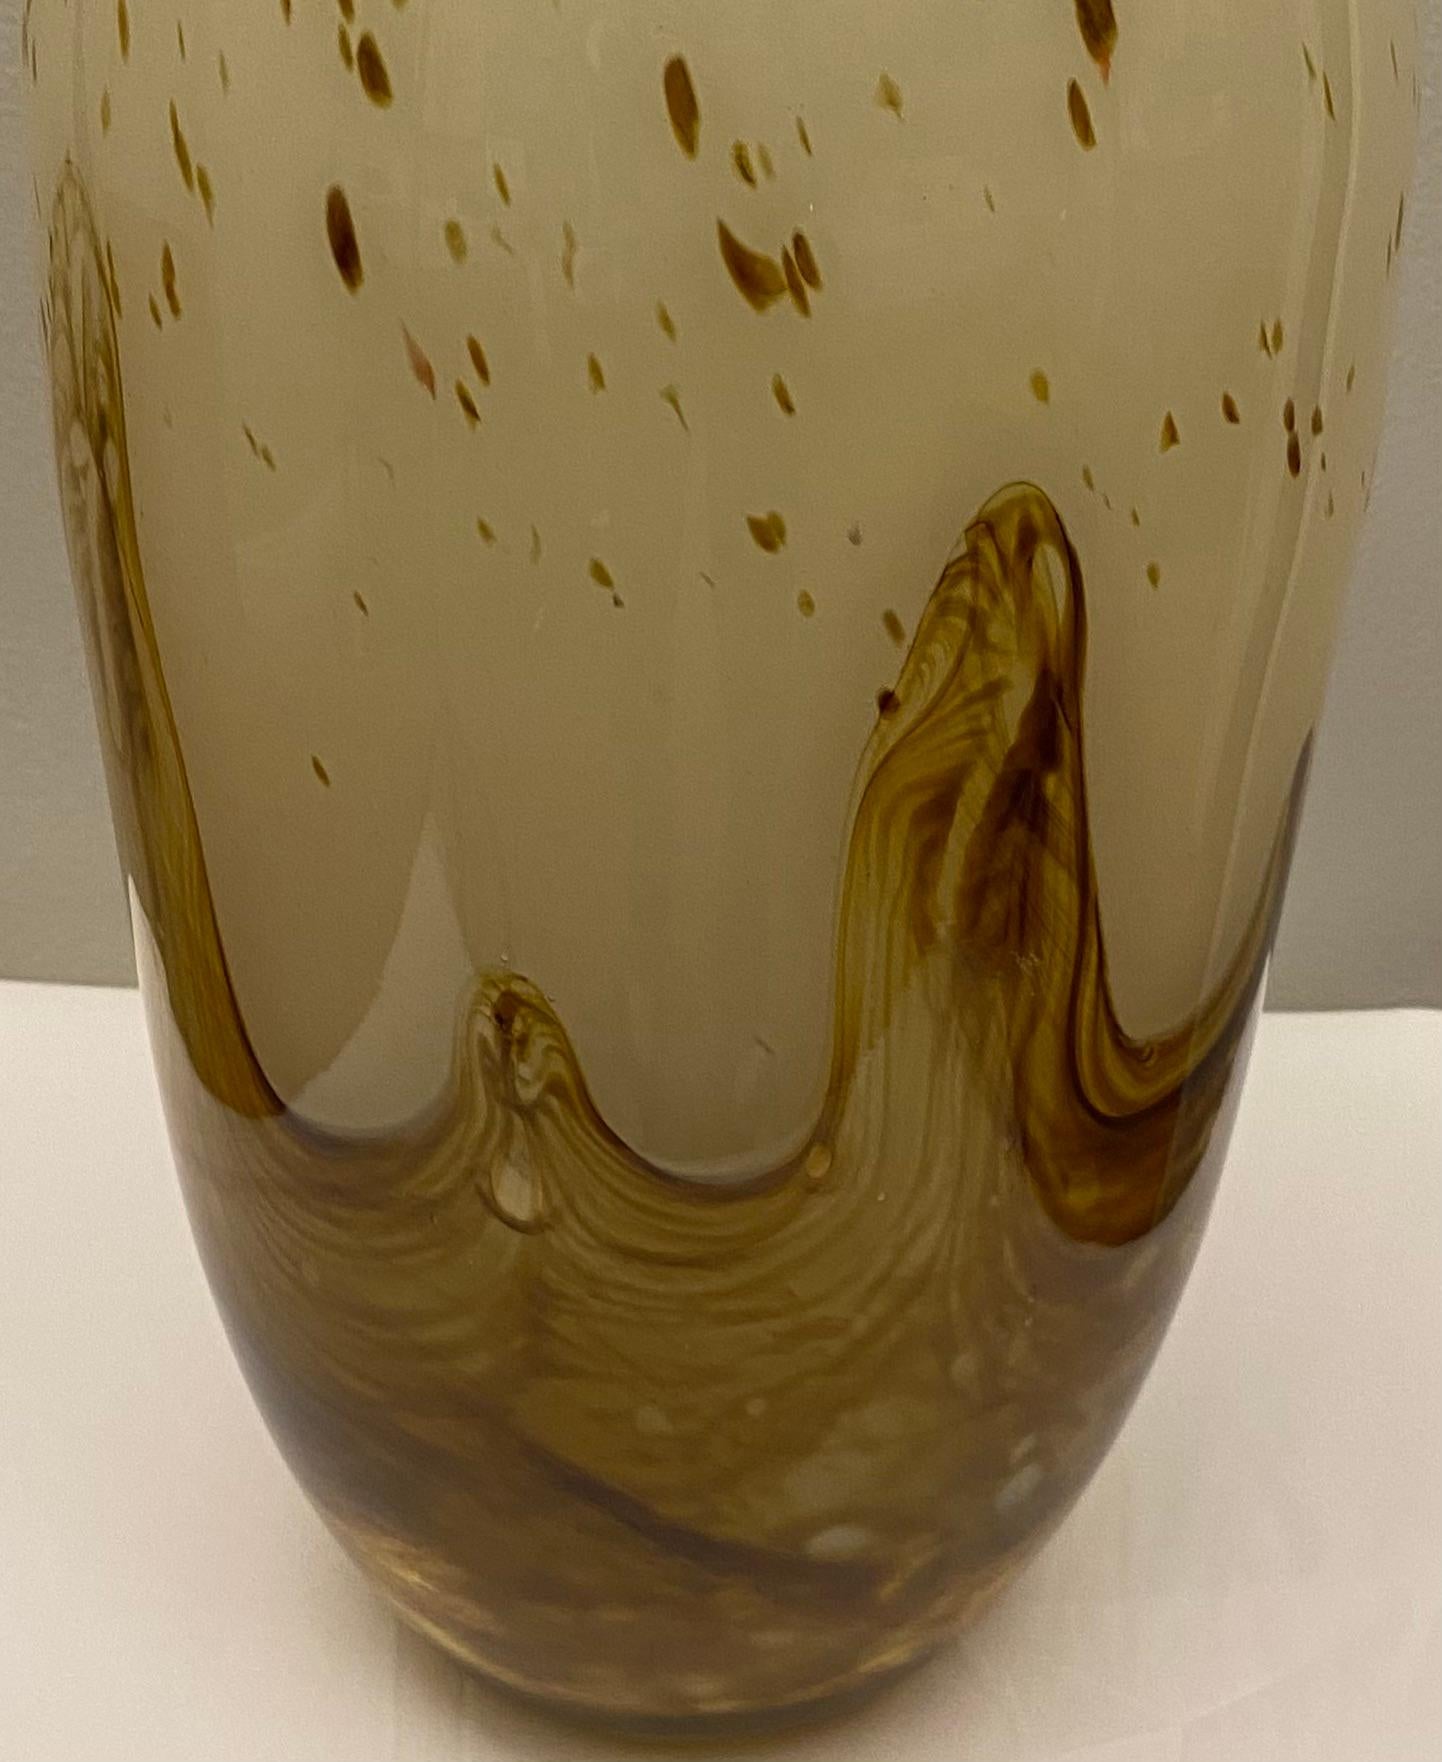 Large Midcentury Murano Art Glass Vase, Beige & Amber Attrib. to Fratelli Toso In Good Condition For Sale In Miami, FL